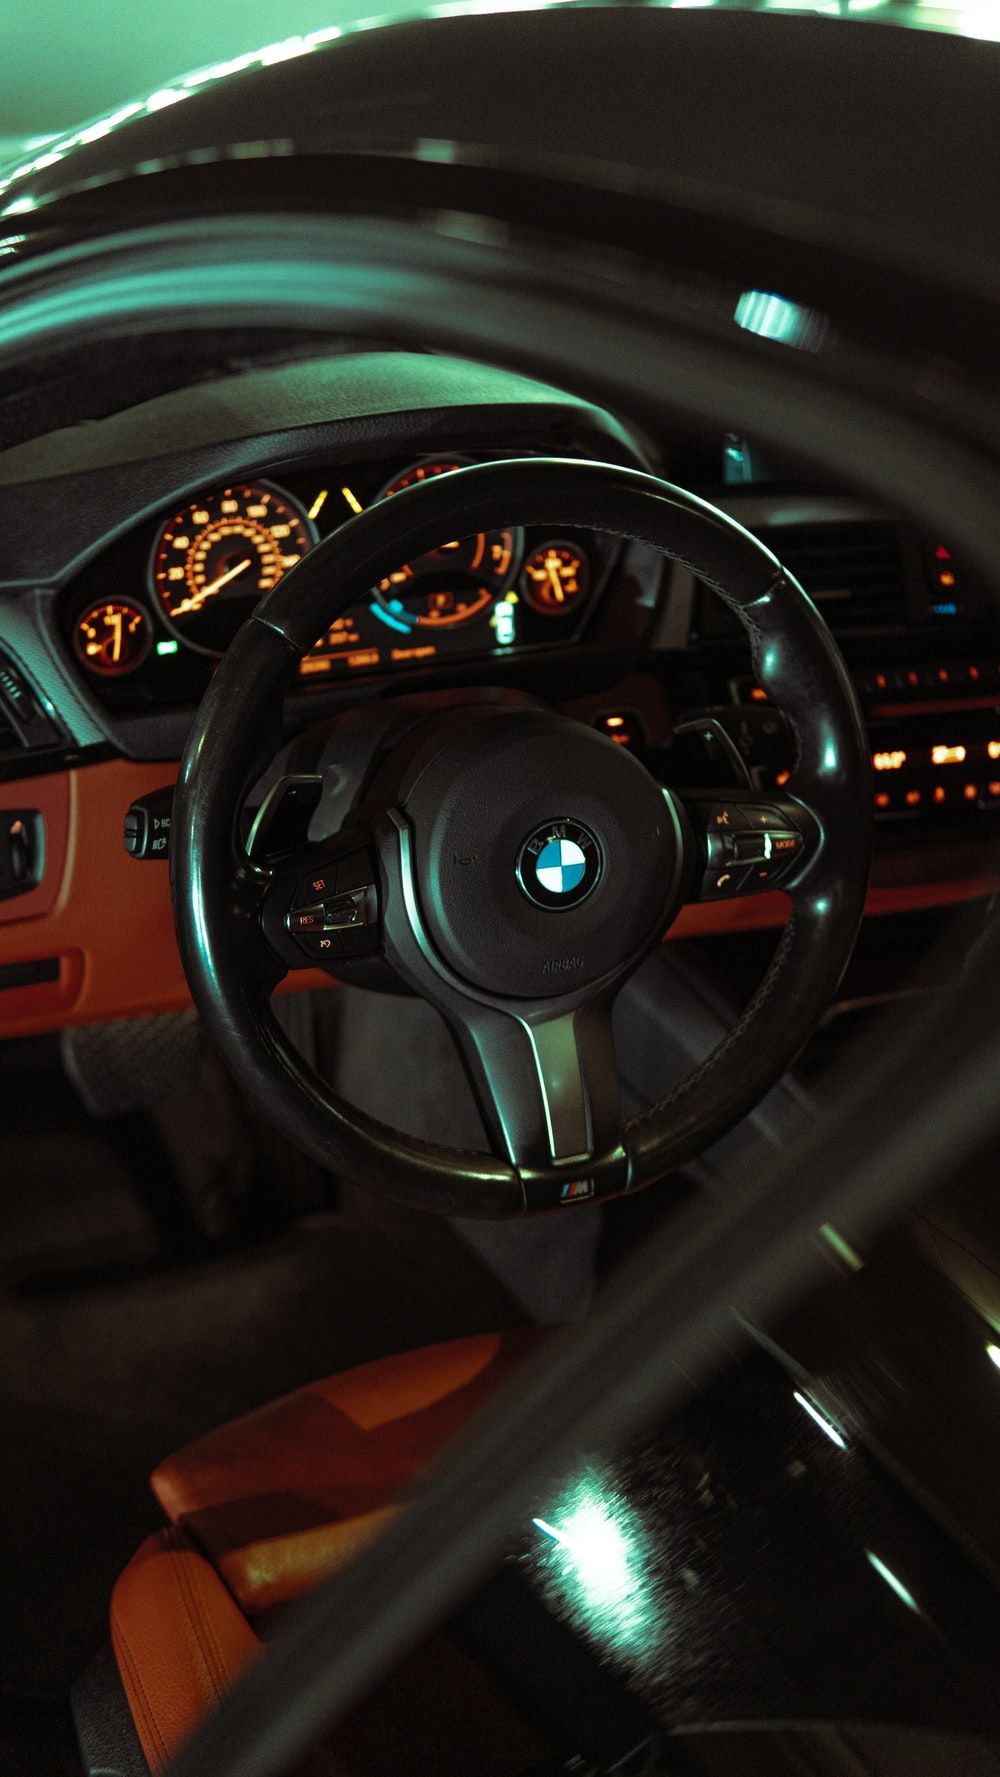 Bmw Interior Picture. Download Free Image